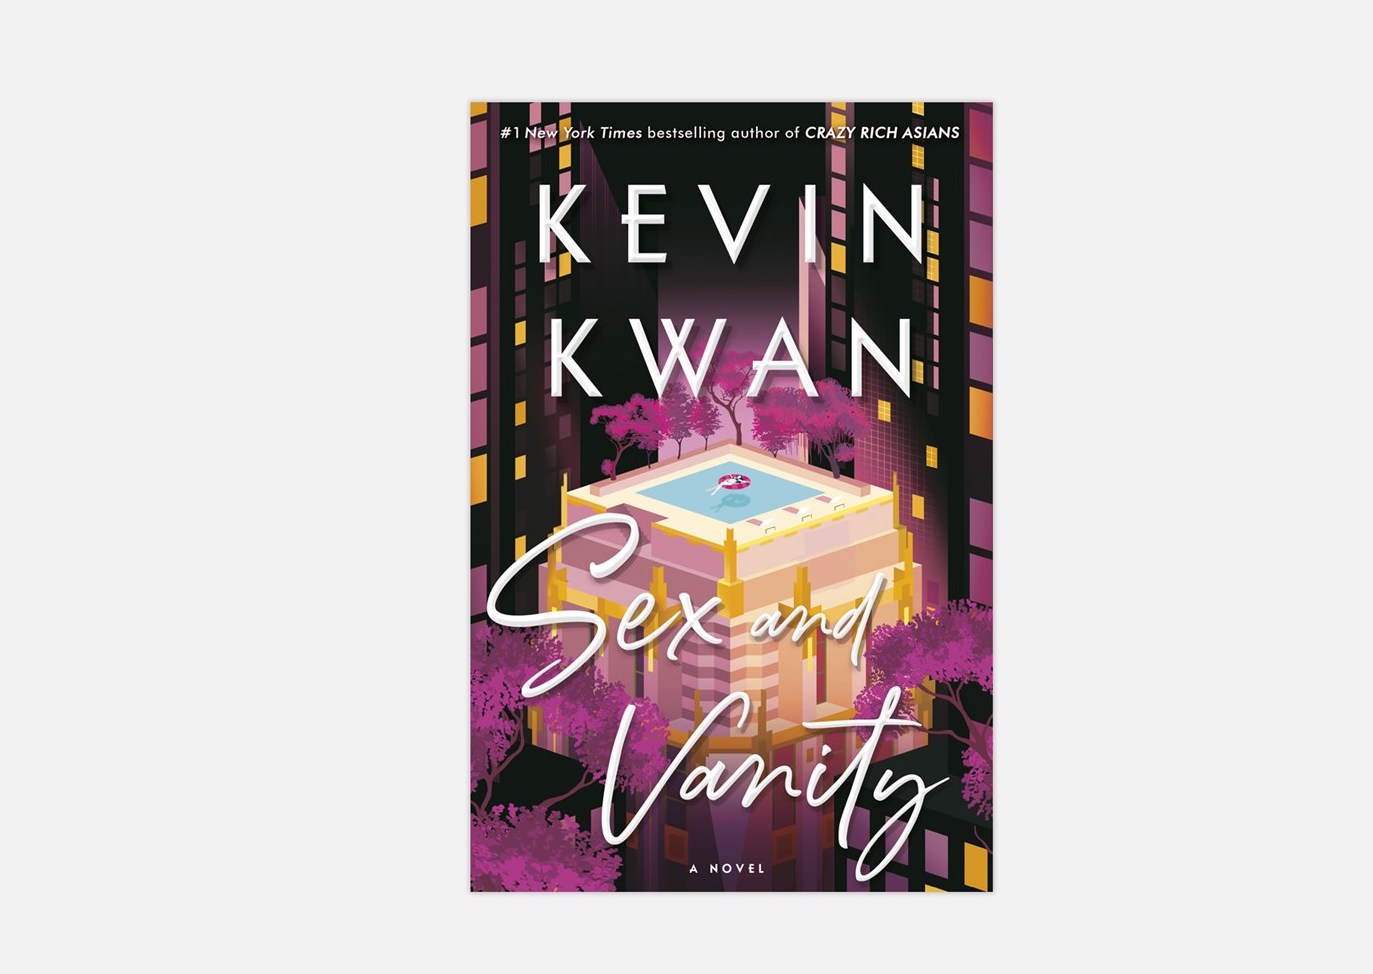 Cover of Kevin Kwan's novel Sex and Vanity